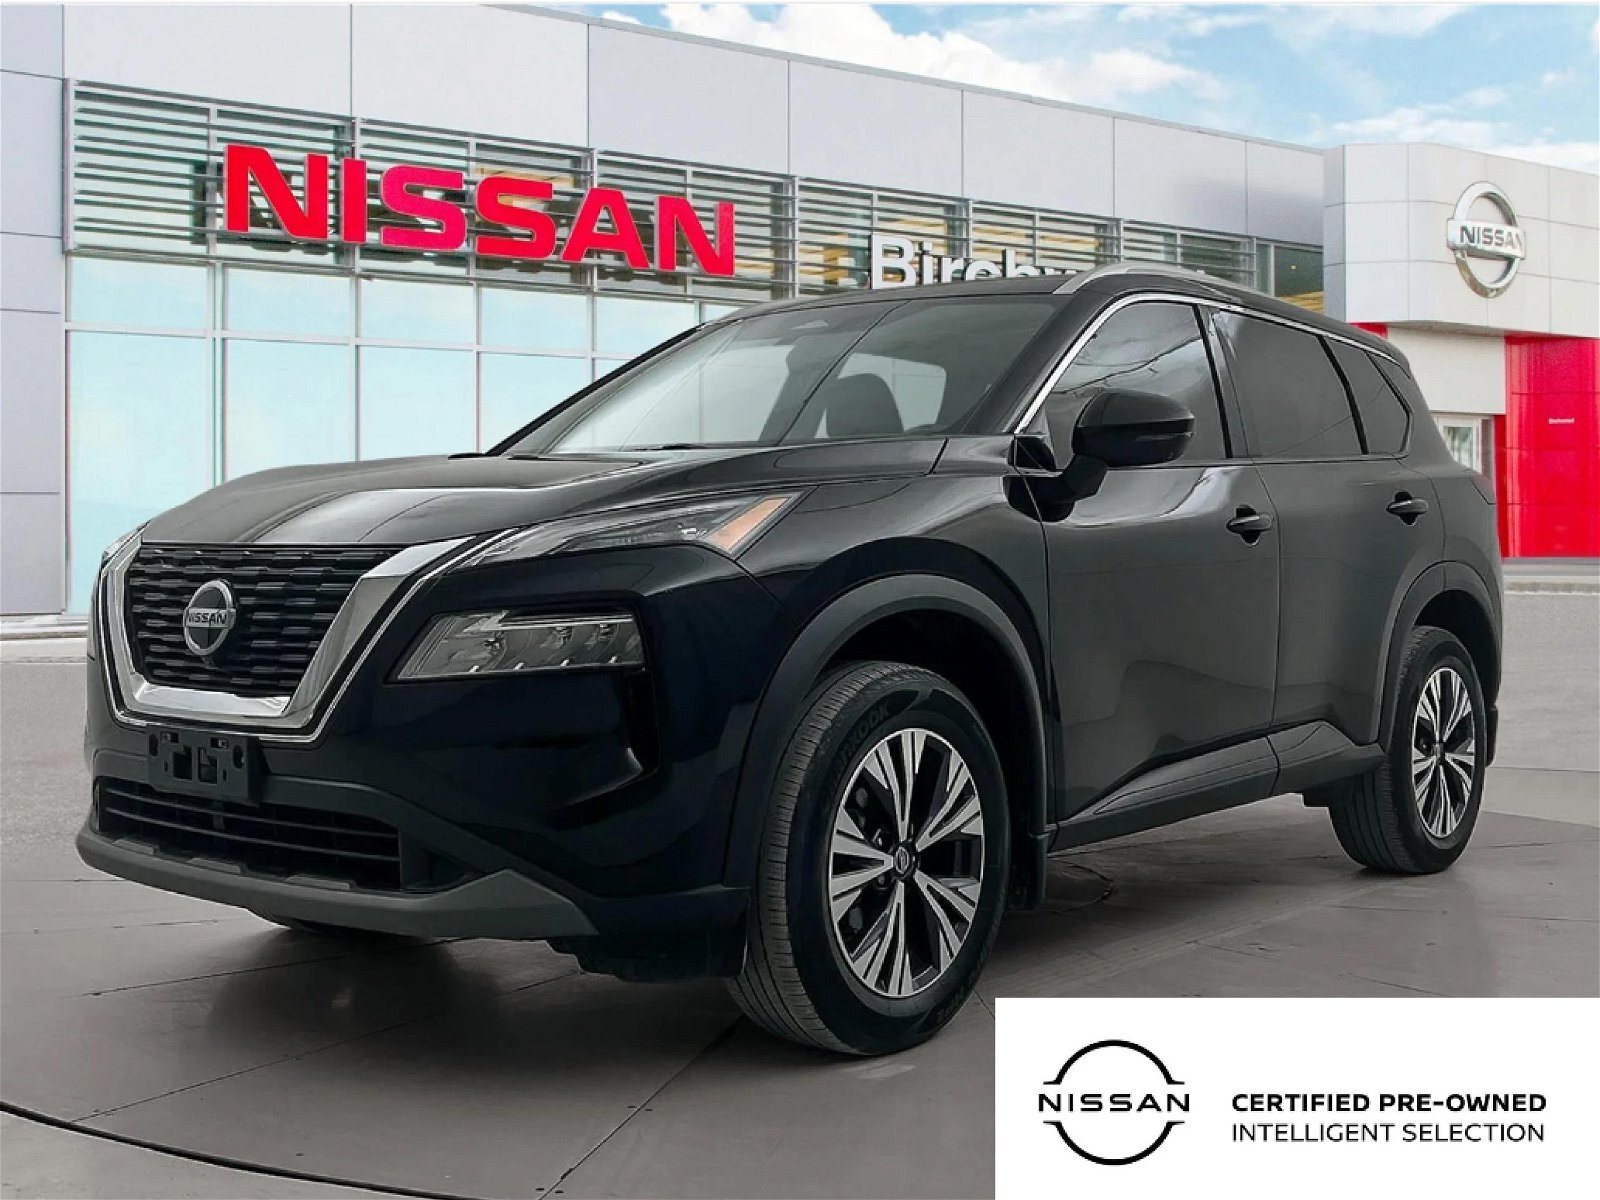 2021 Nissan Rogue SV Premium | Accident free | Good Condition | One 